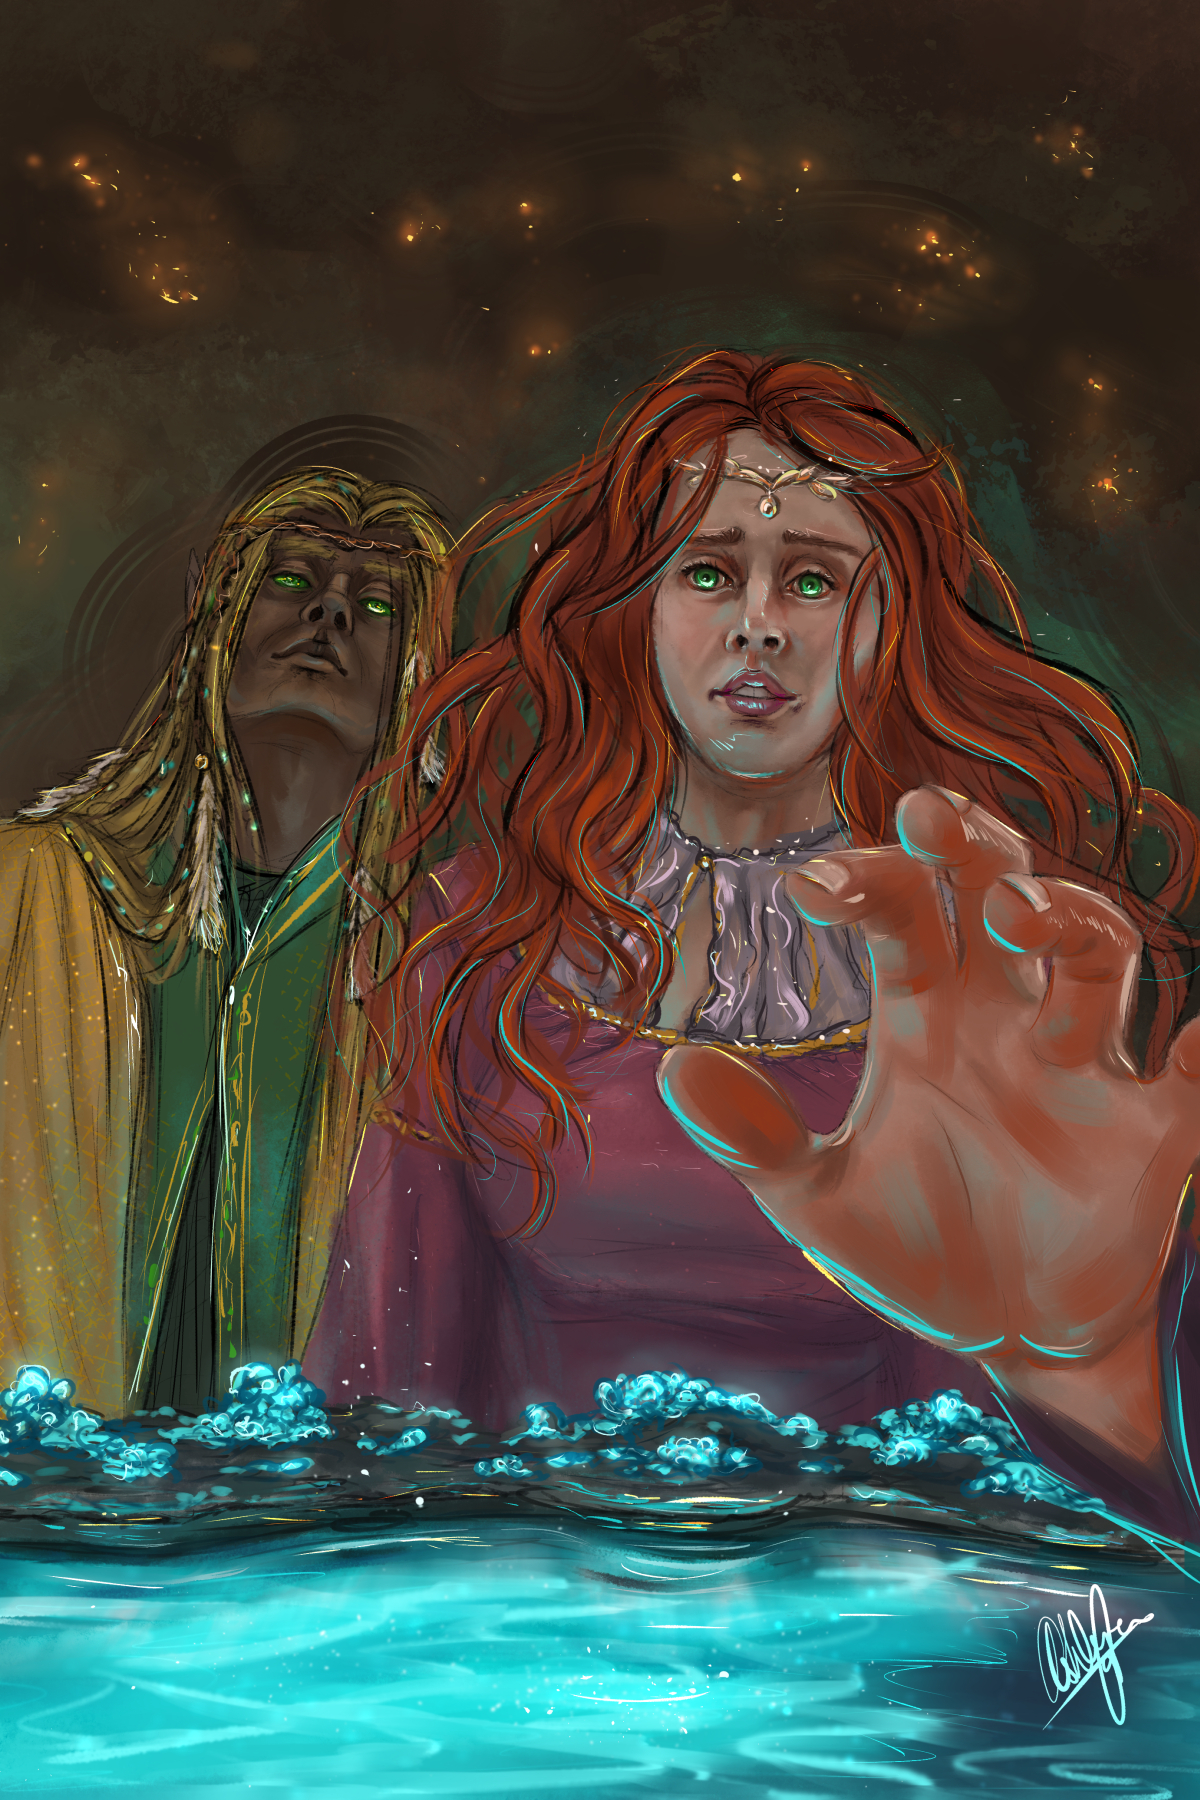 Digital painting of a woman reaching out to touch a pool of water. She looks nervous and hesitant. There's a man standing behind her, looking more confident about the whole thing.